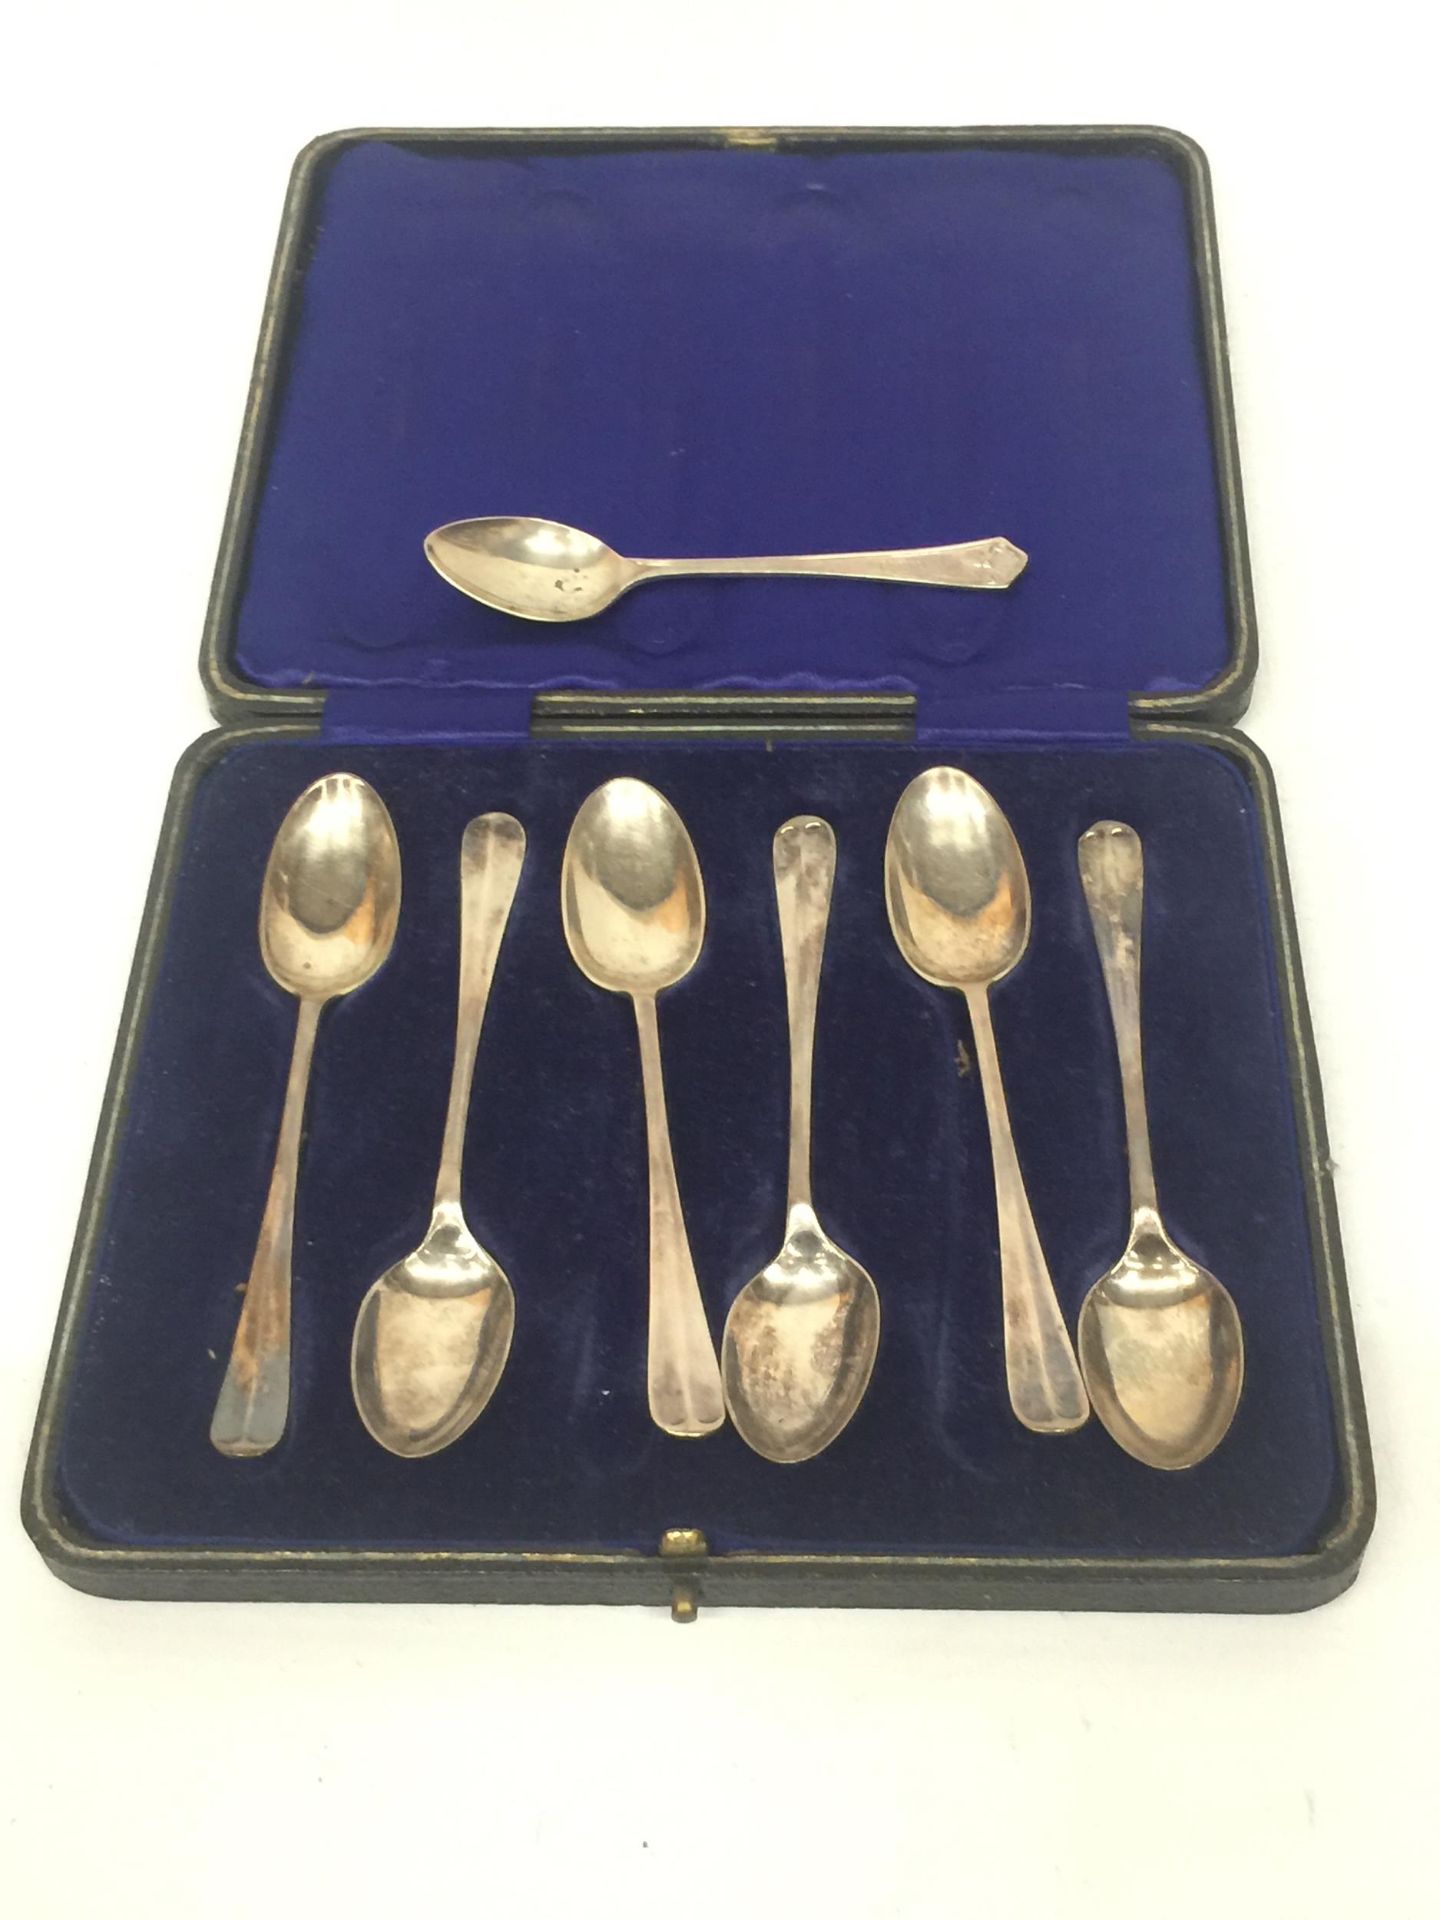 A CASED SET OF SIX HALLMARKED SILVER TEASPOONS WITH FURTHER LOOSE TEASPOON